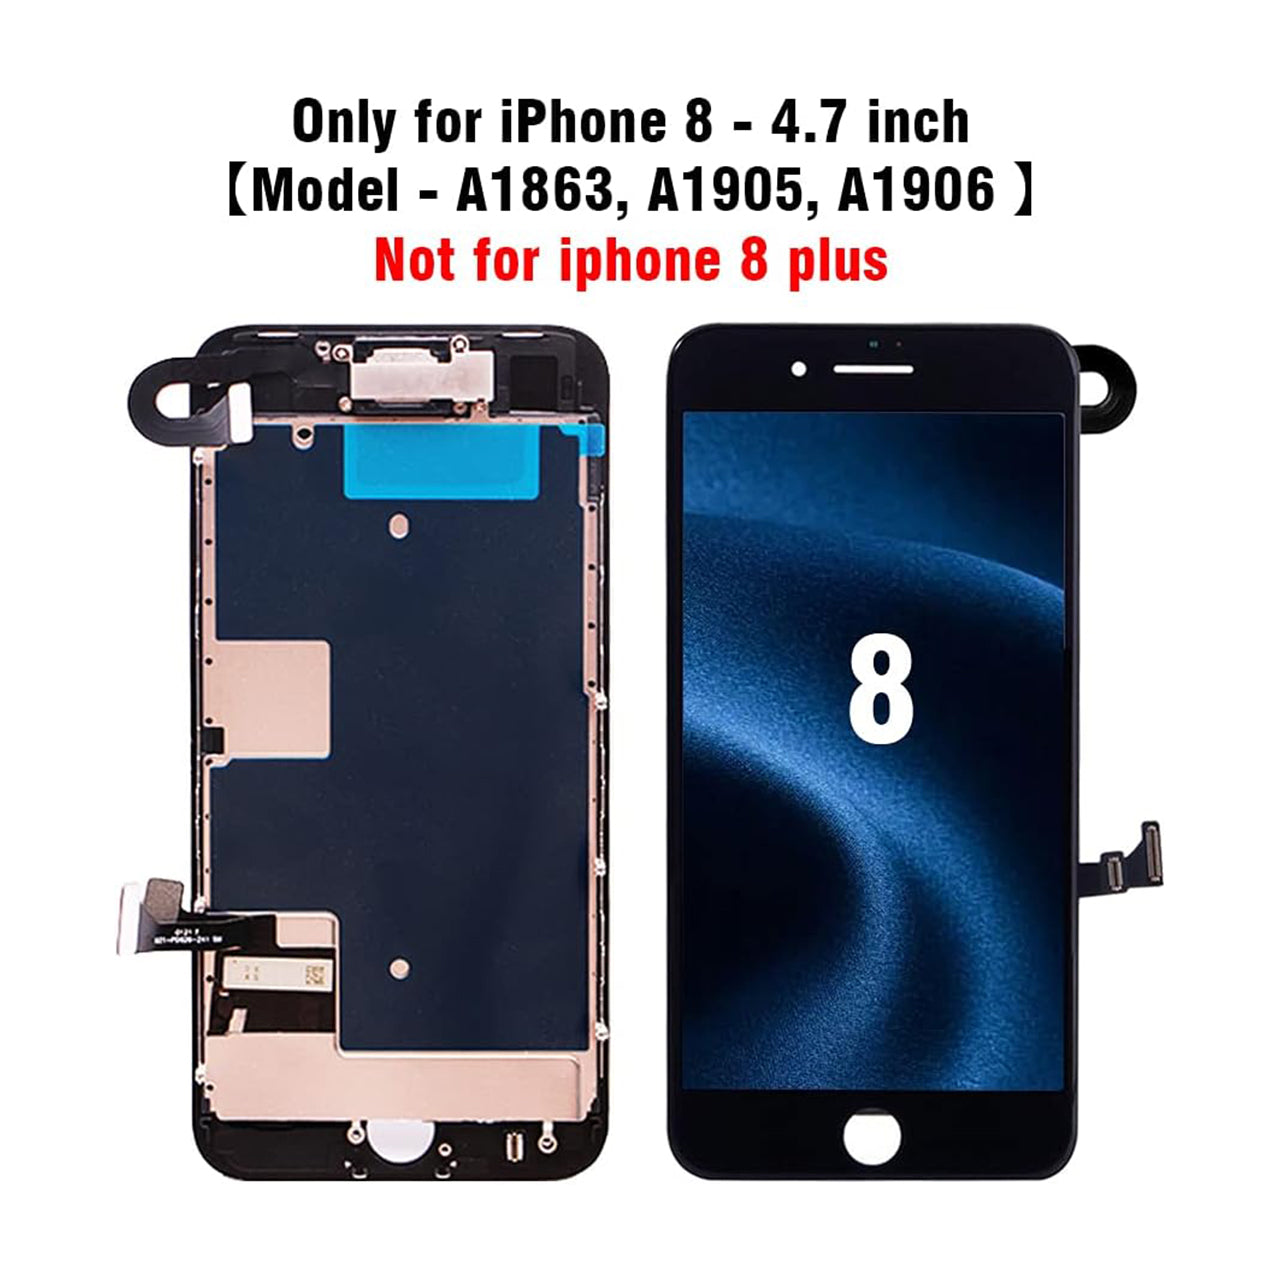 iPhone 8 reemplazo de pantalla LCD (A1863, A1905, A1906)  - iPhone 8 LCD Screen Replacement